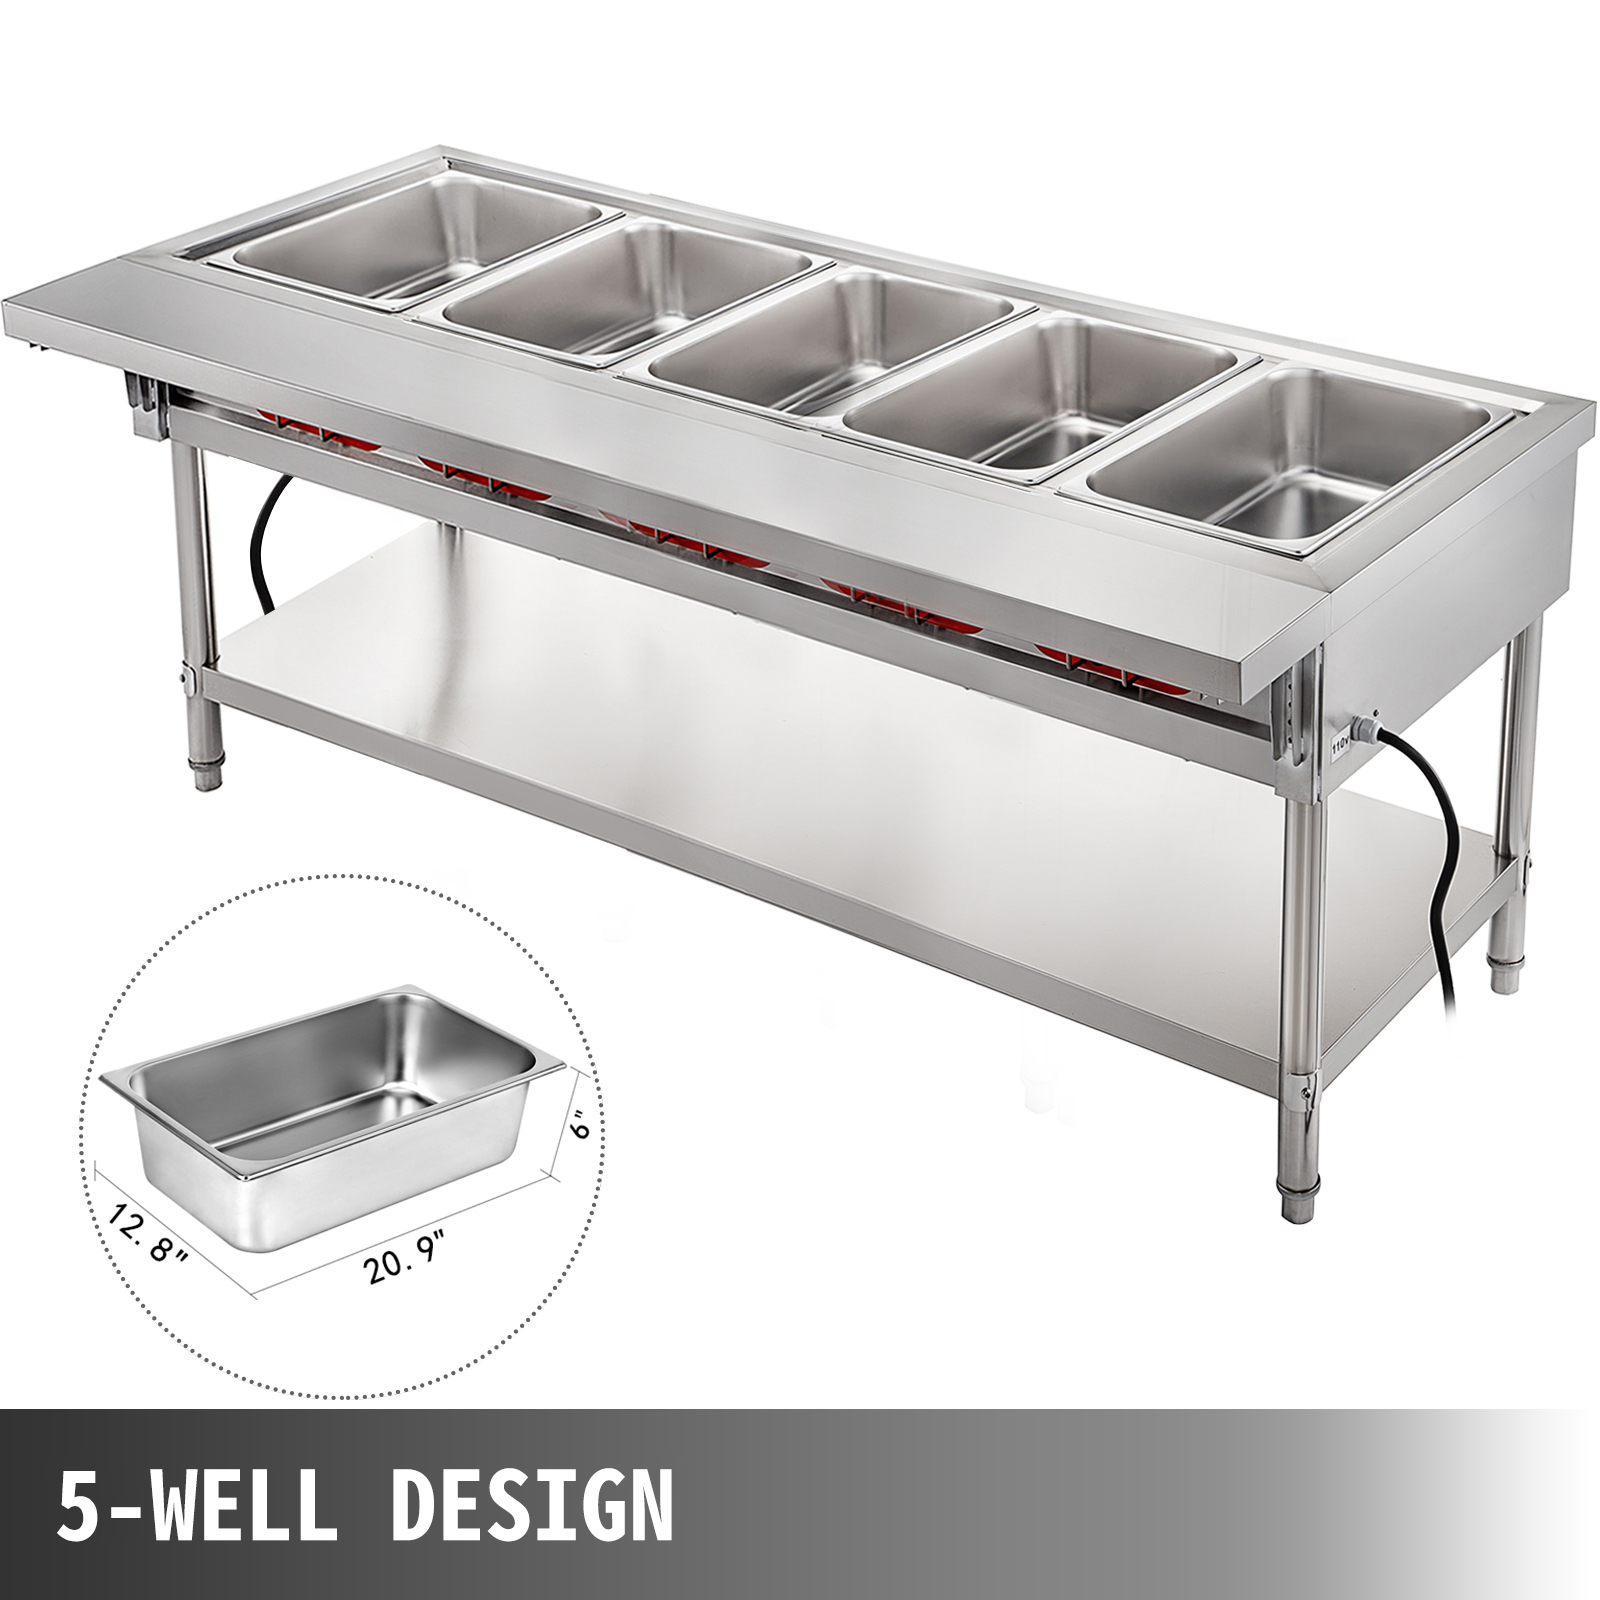 https://d2qc09rl1gfuof.cloudfront.net/product/CJRT5G3750W000001/commercial-steam-table-m100-3.jpg